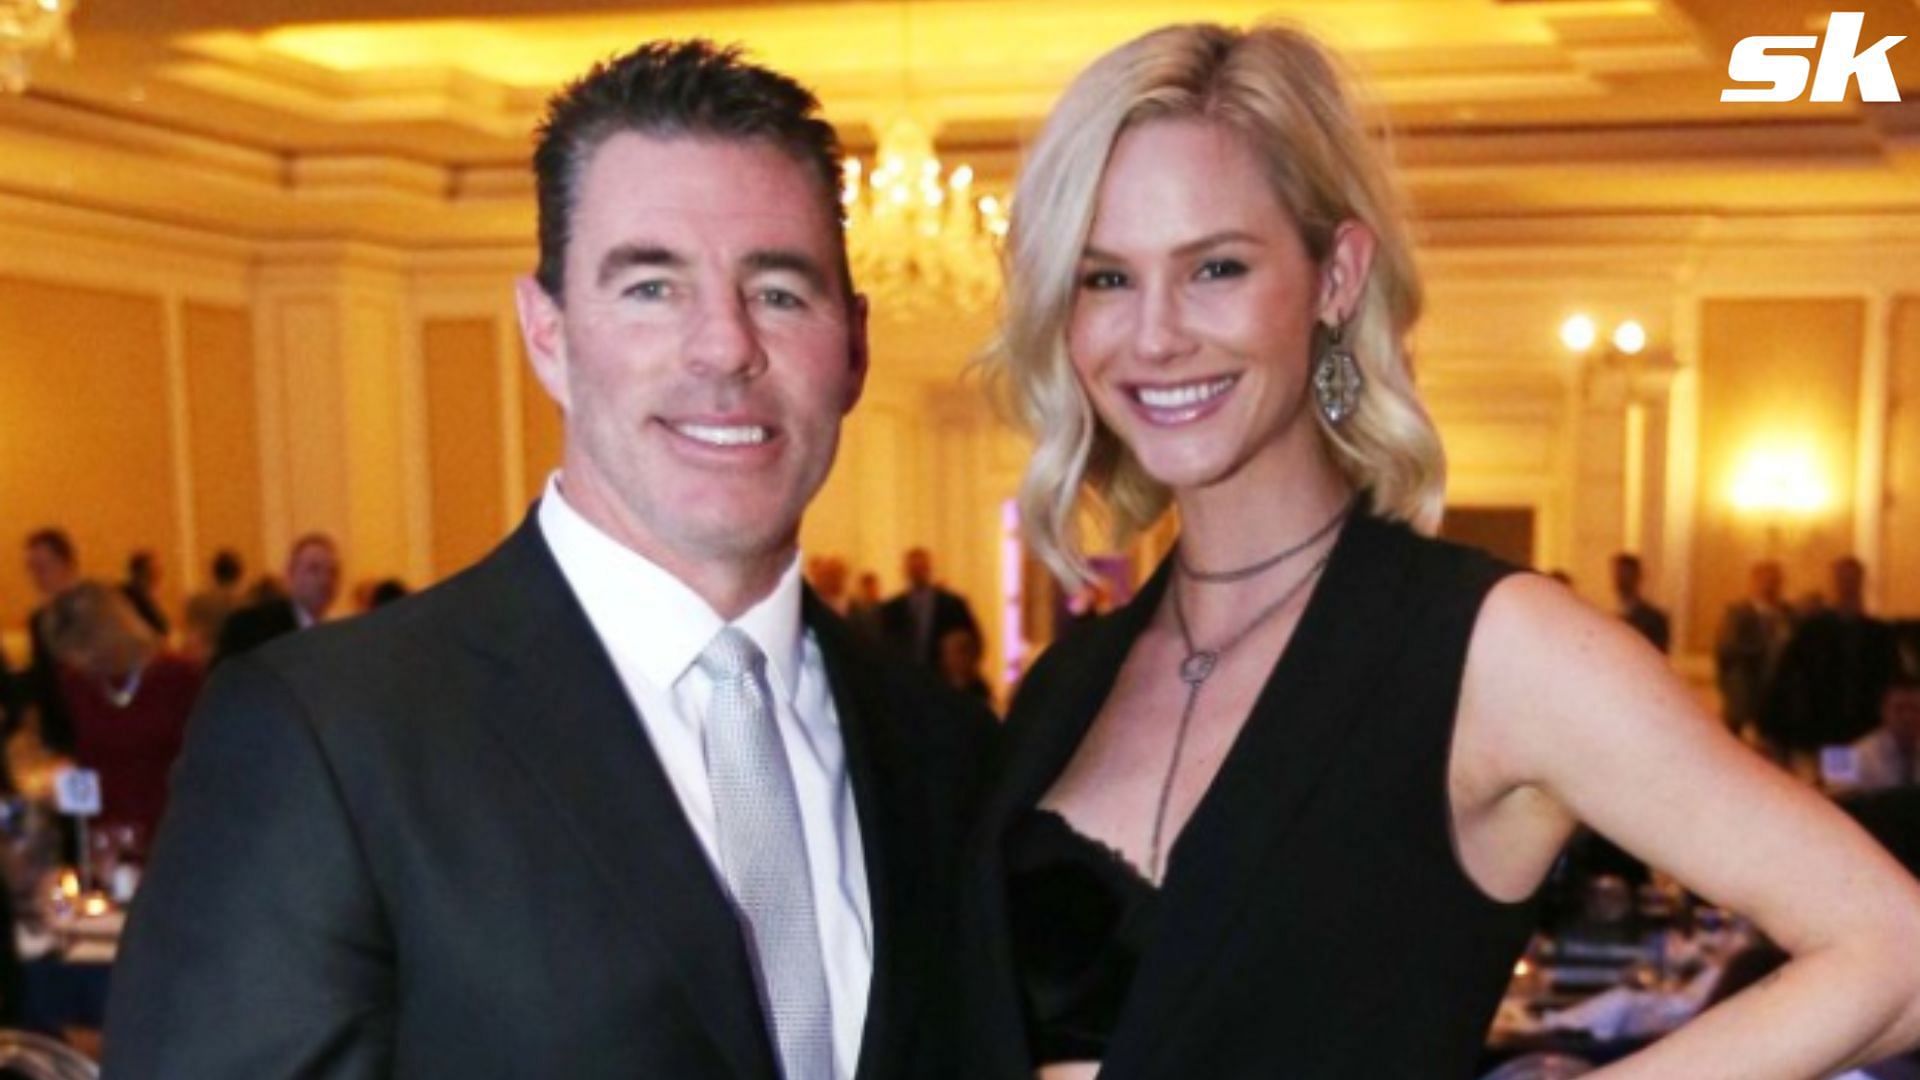 Meghan King was stunned when news came out in tabloids about her divorce with Jim Edmonds